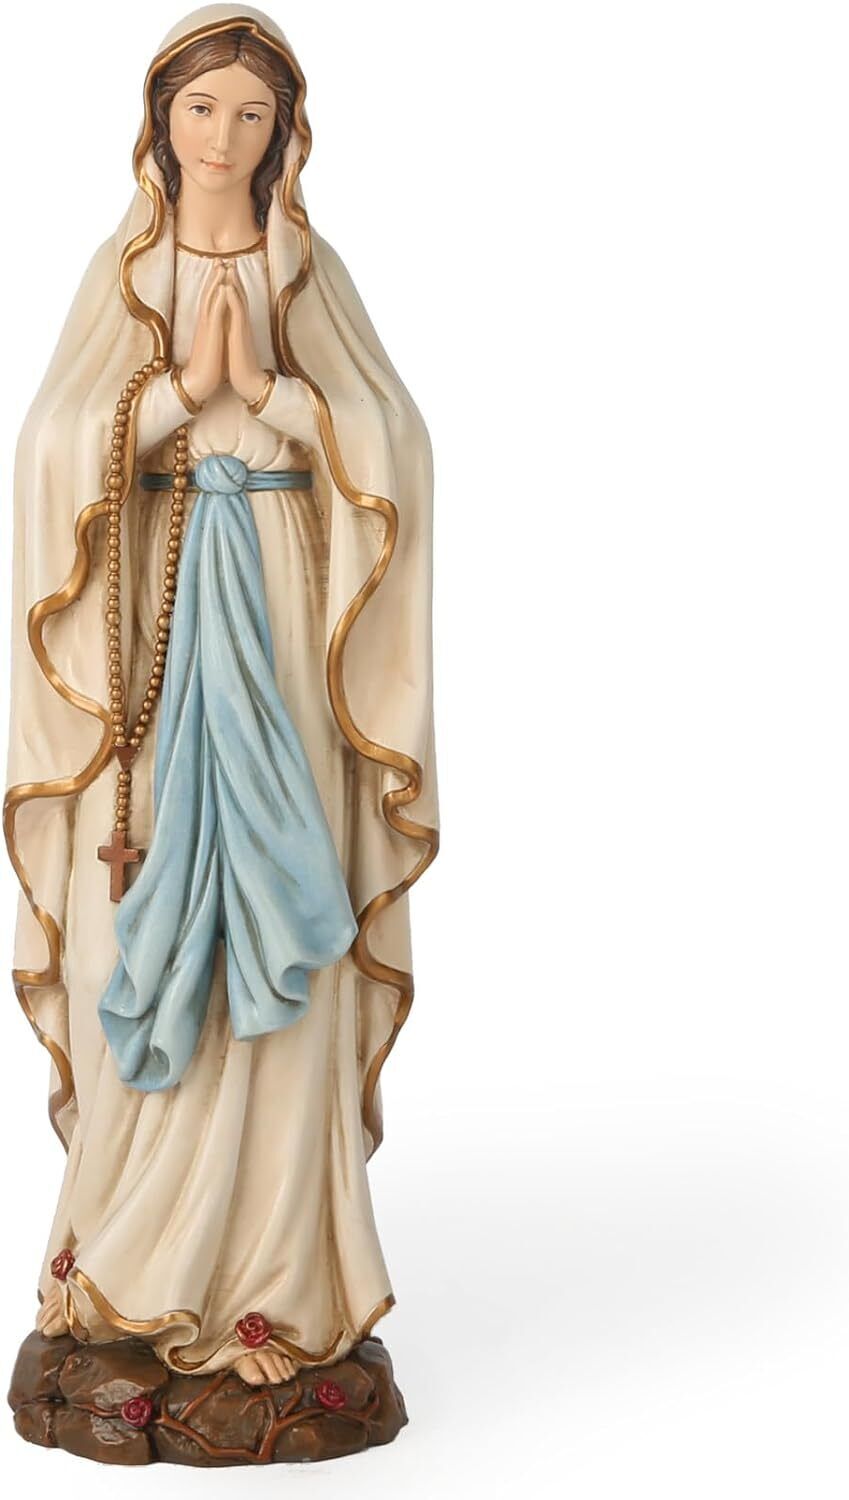 Catholic Our Lady of Lourdes Statue, Blessed Virgin Mary Mother Figure,